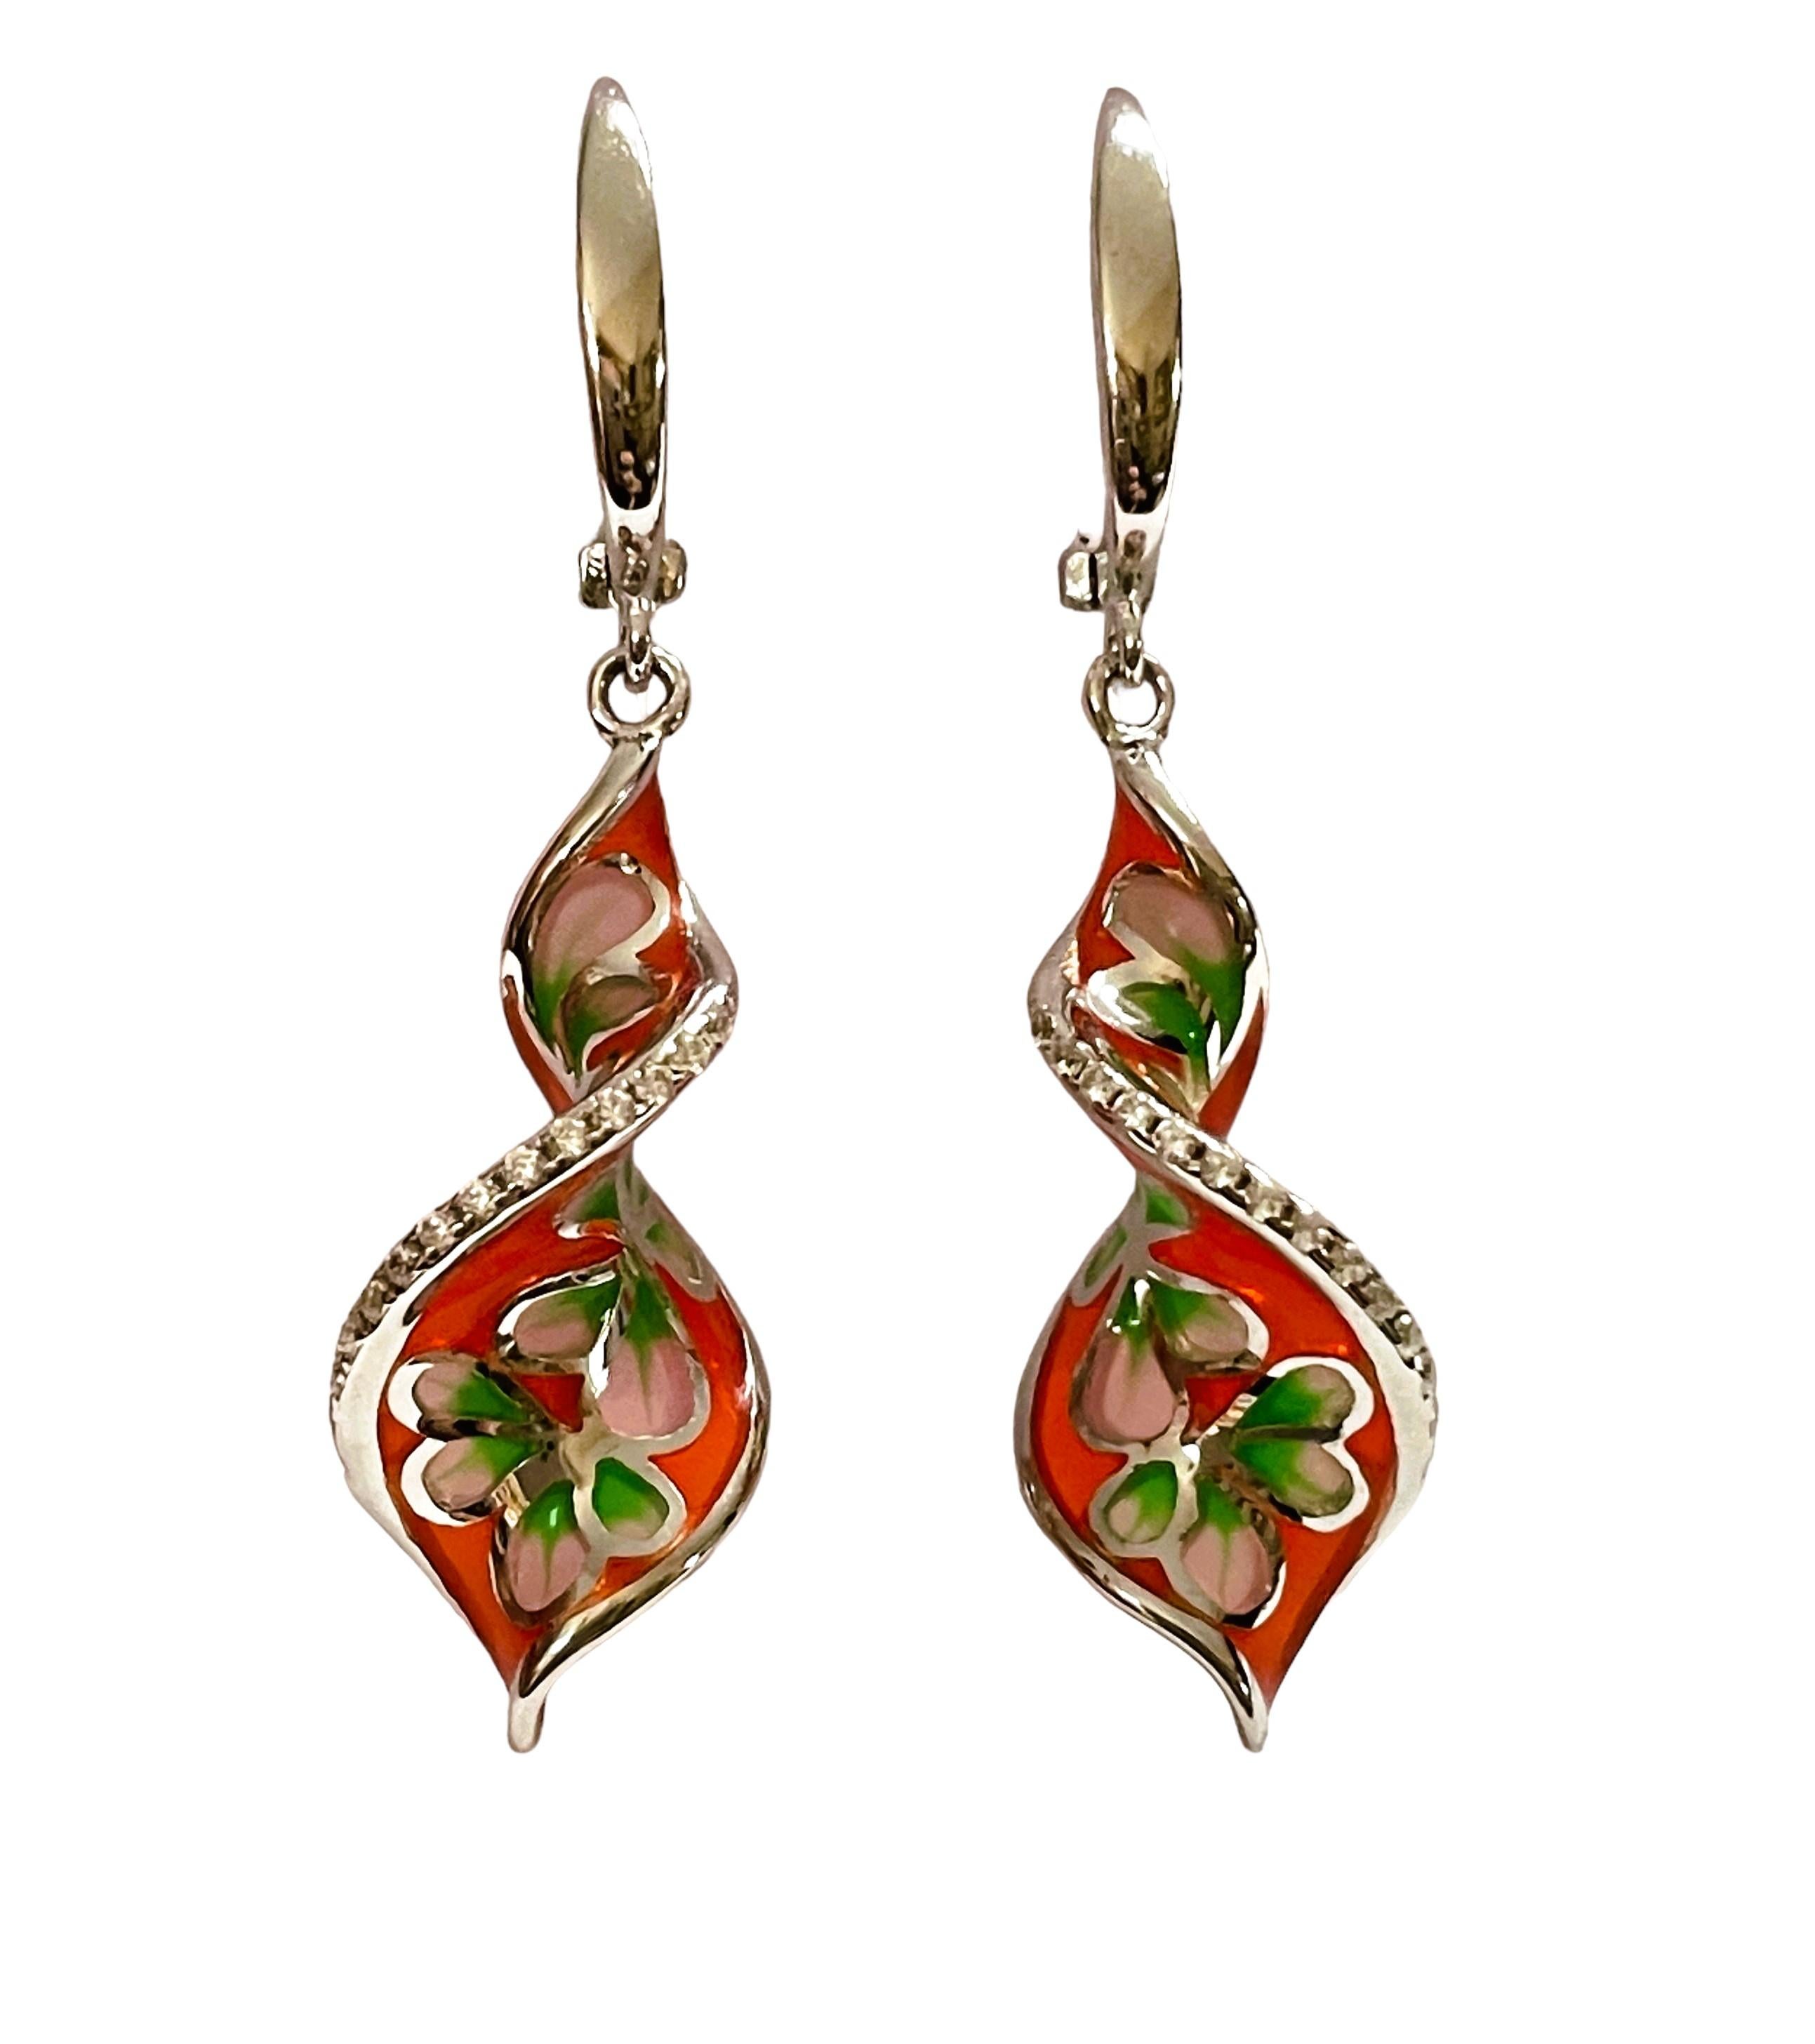 New Multi-Colored Painted Enamel Sterling Earrings In New Condition For Sale In Eagan, MN